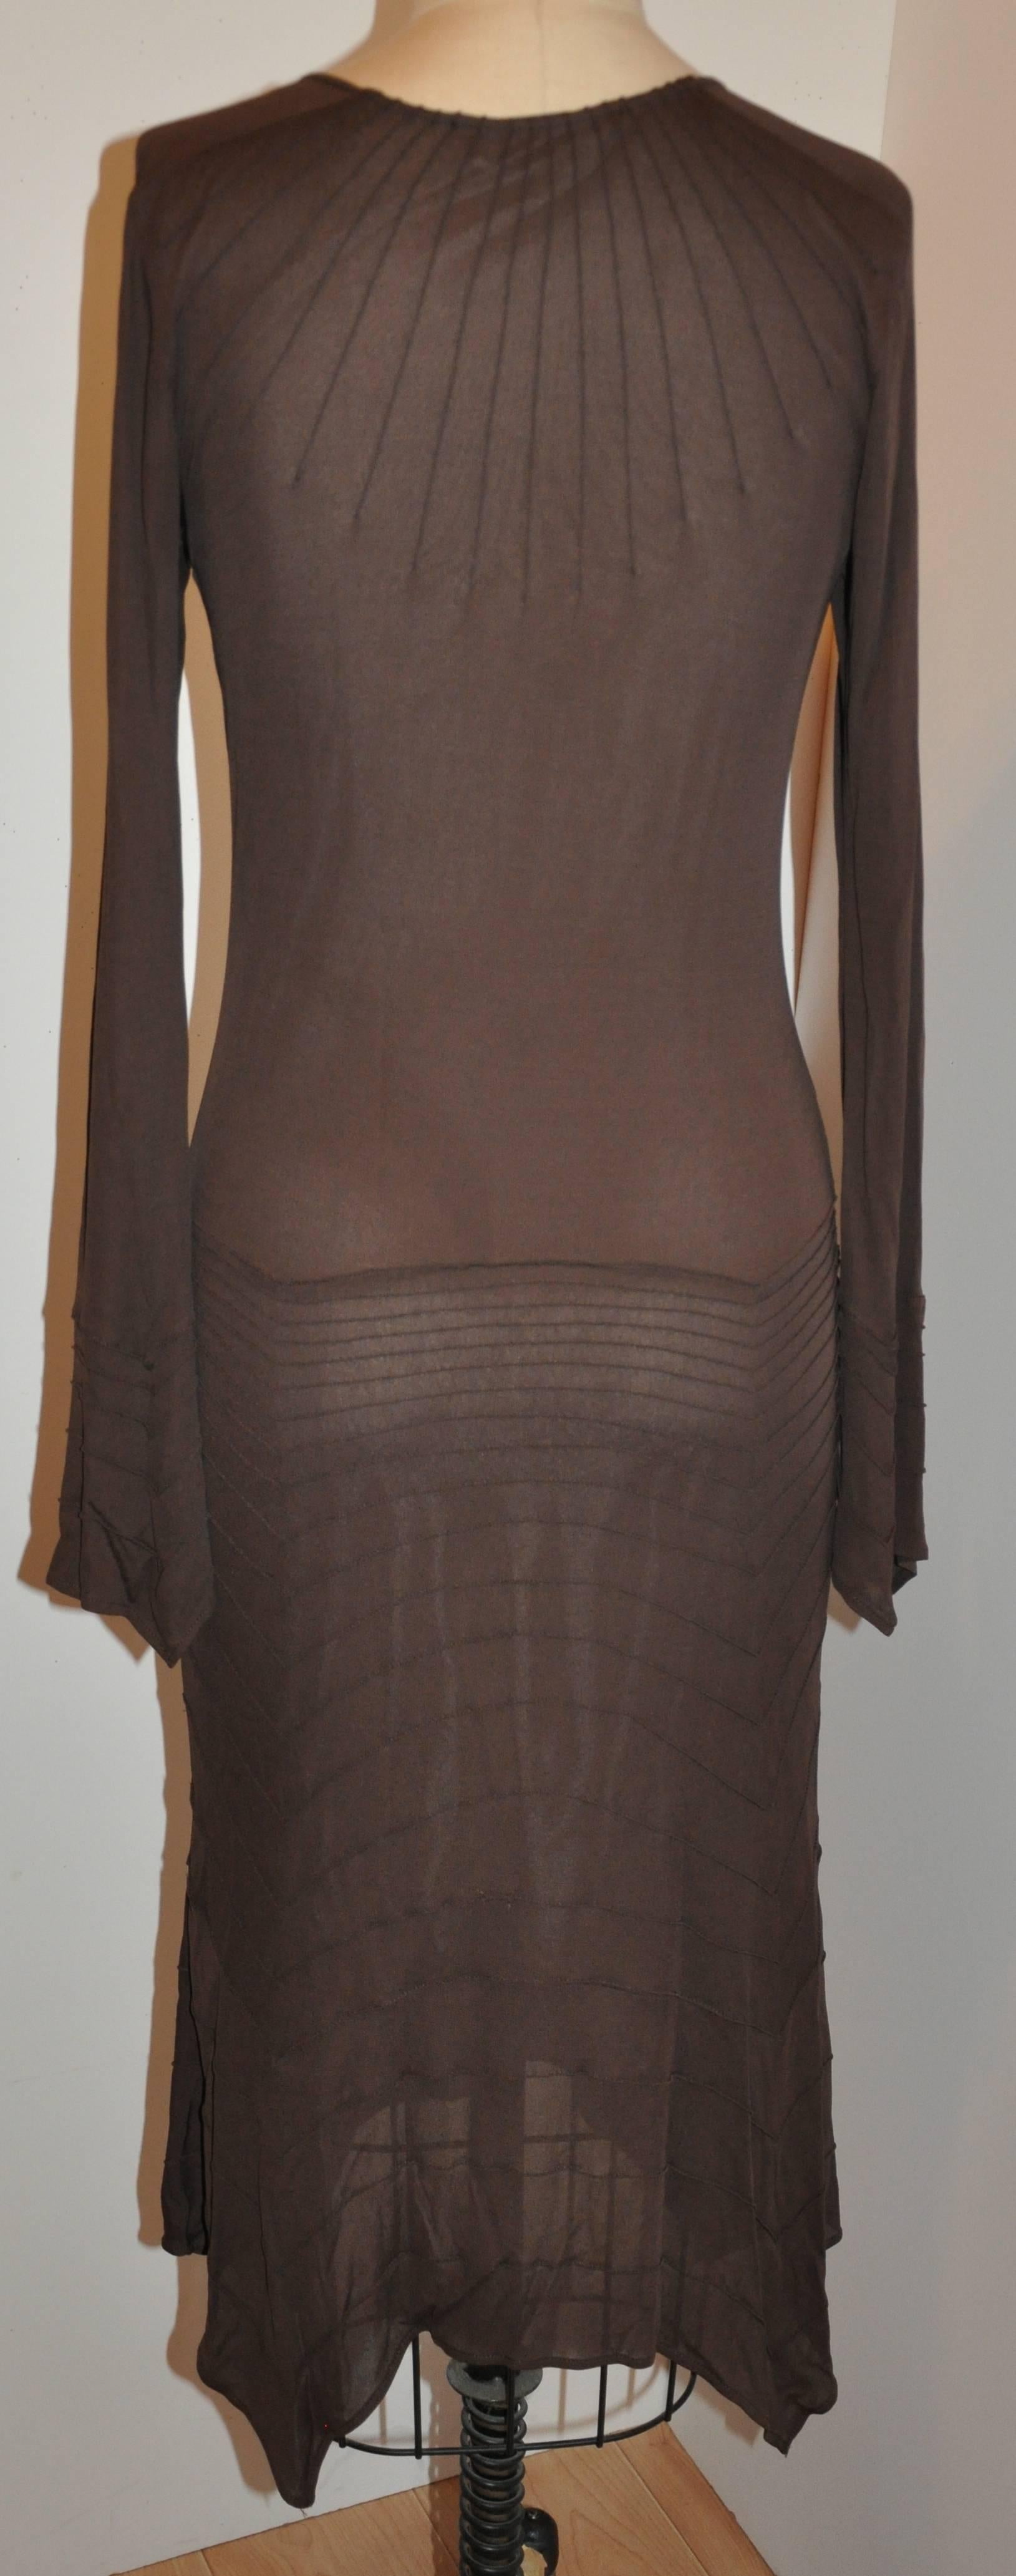           Yves Saint Laurent coco brown form-fitting lined jersey scoop-neck dress features a handkerchief hemline on both the dress's hem and also on the bell-sleeve's cuff. Detailed top-stitching throughout this wonderful dress.
          The